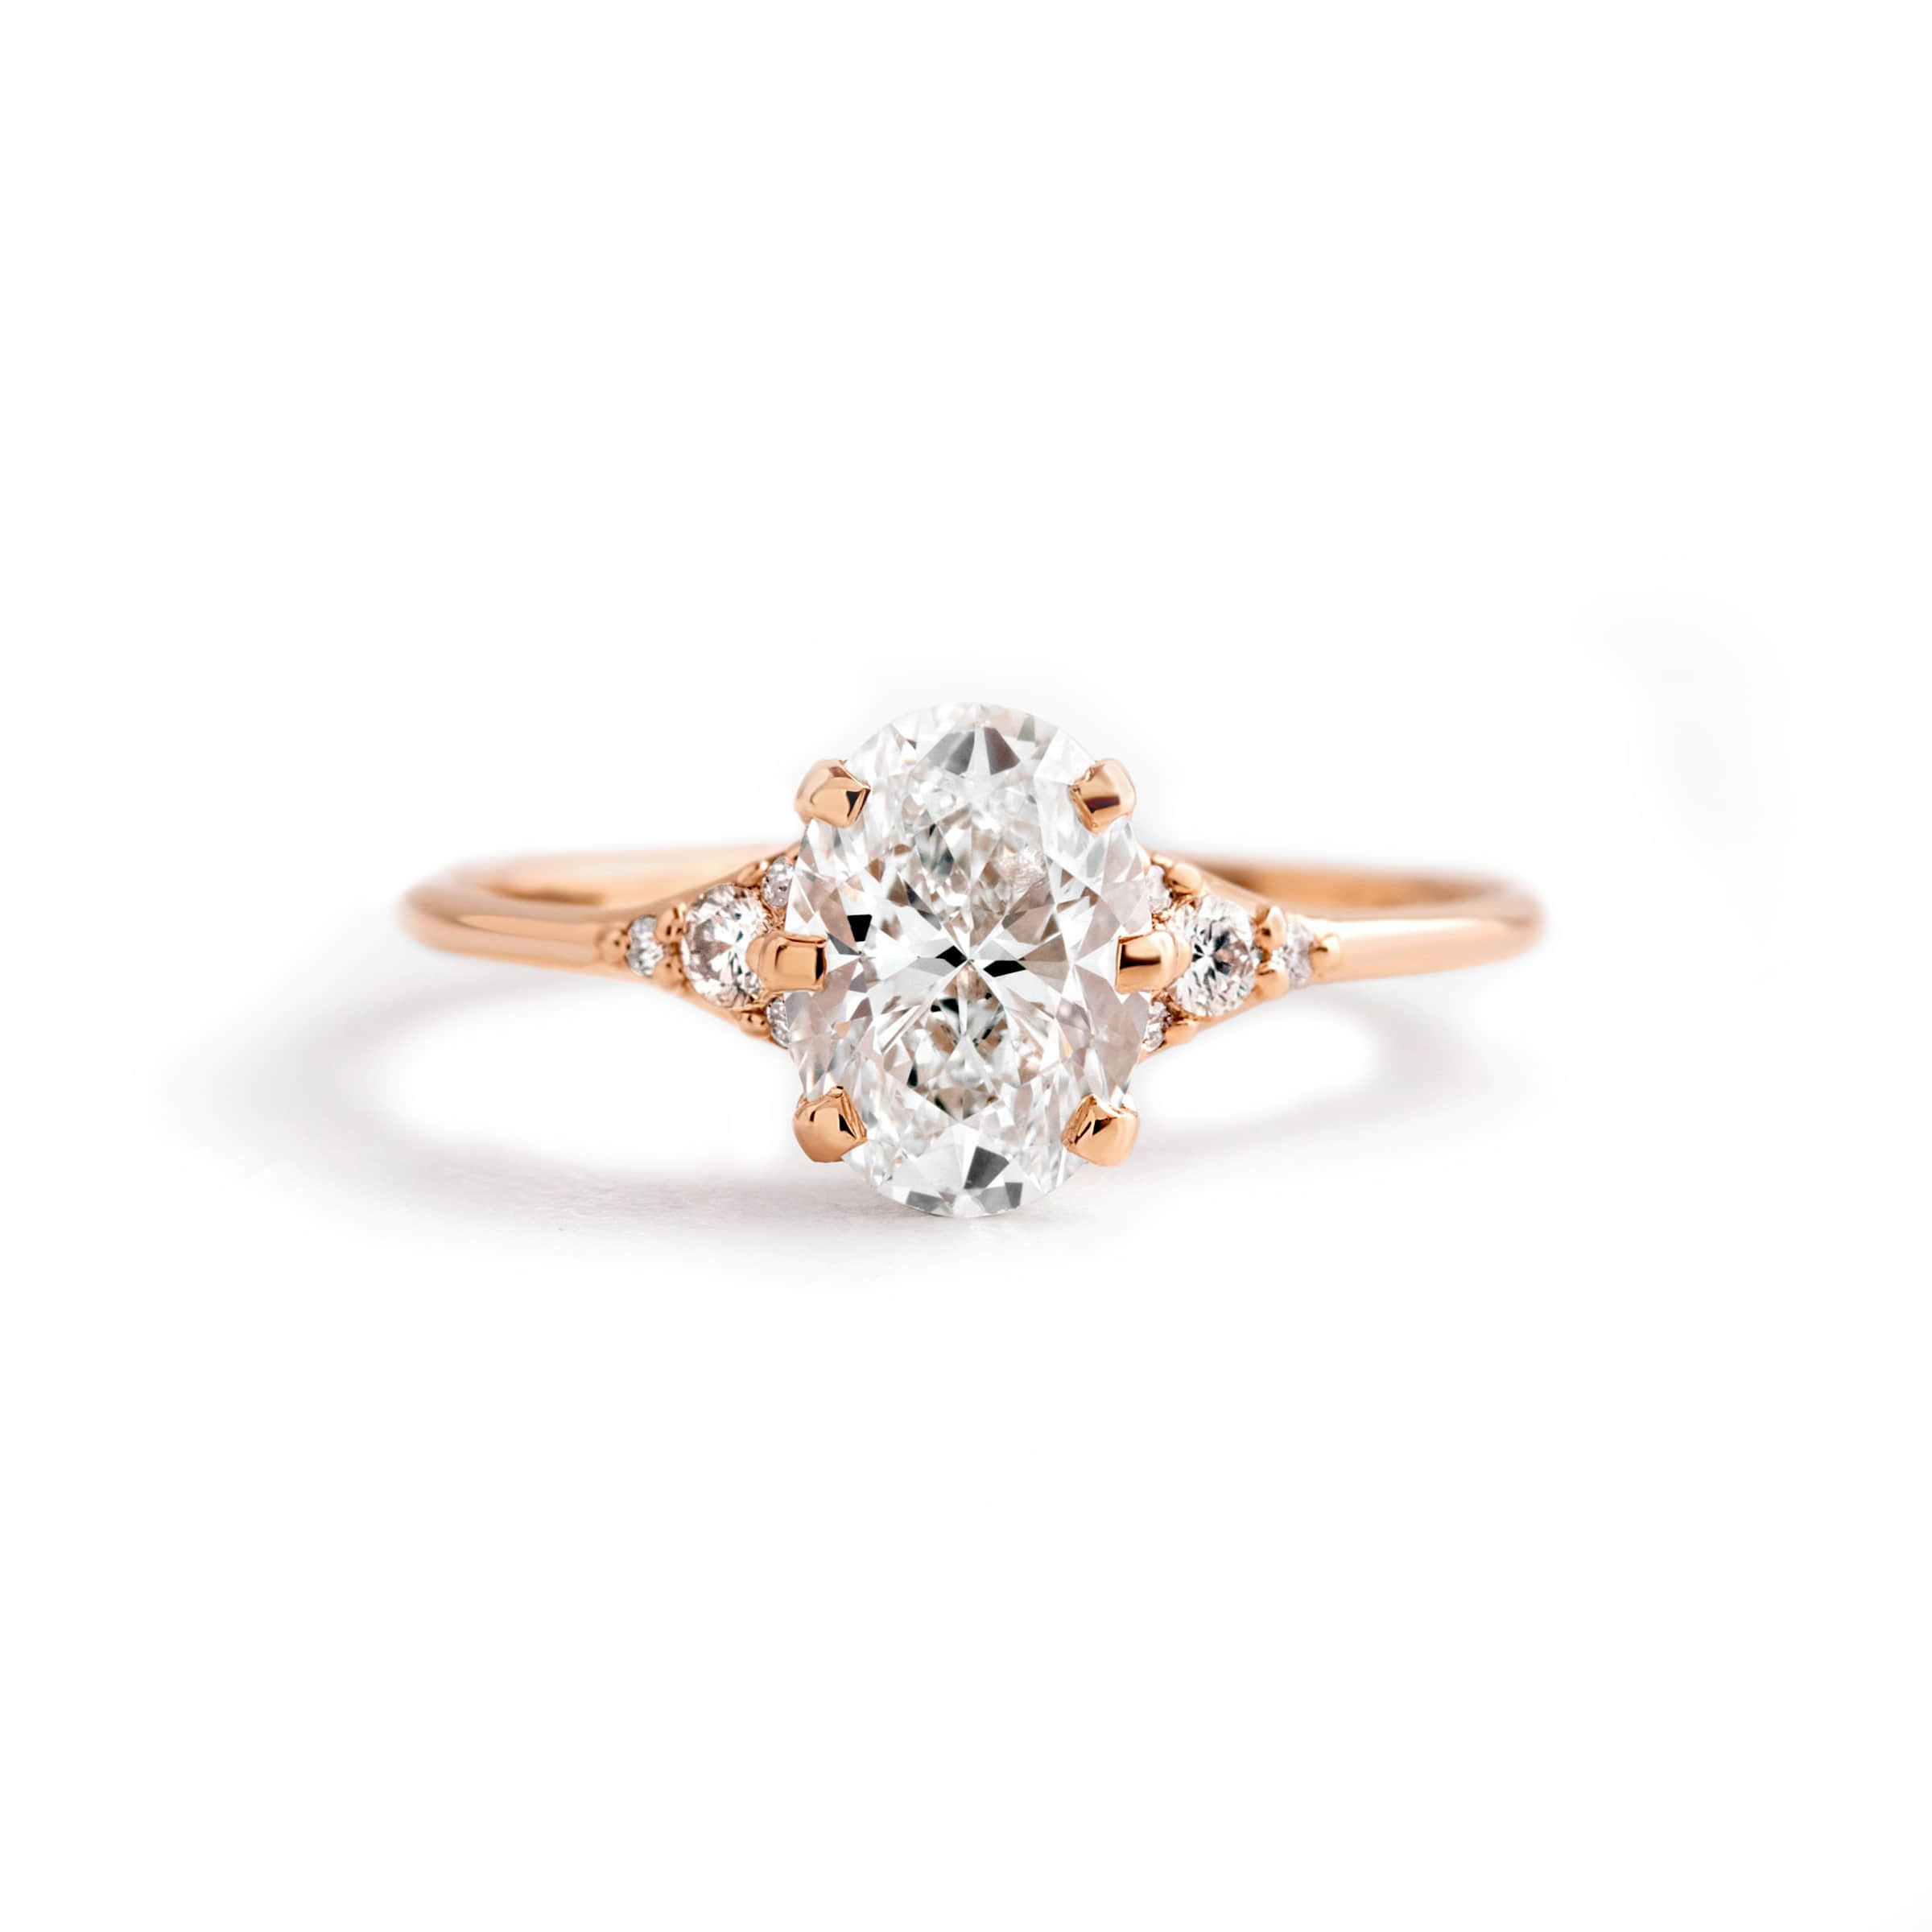 Darry Ring dainty promise ring